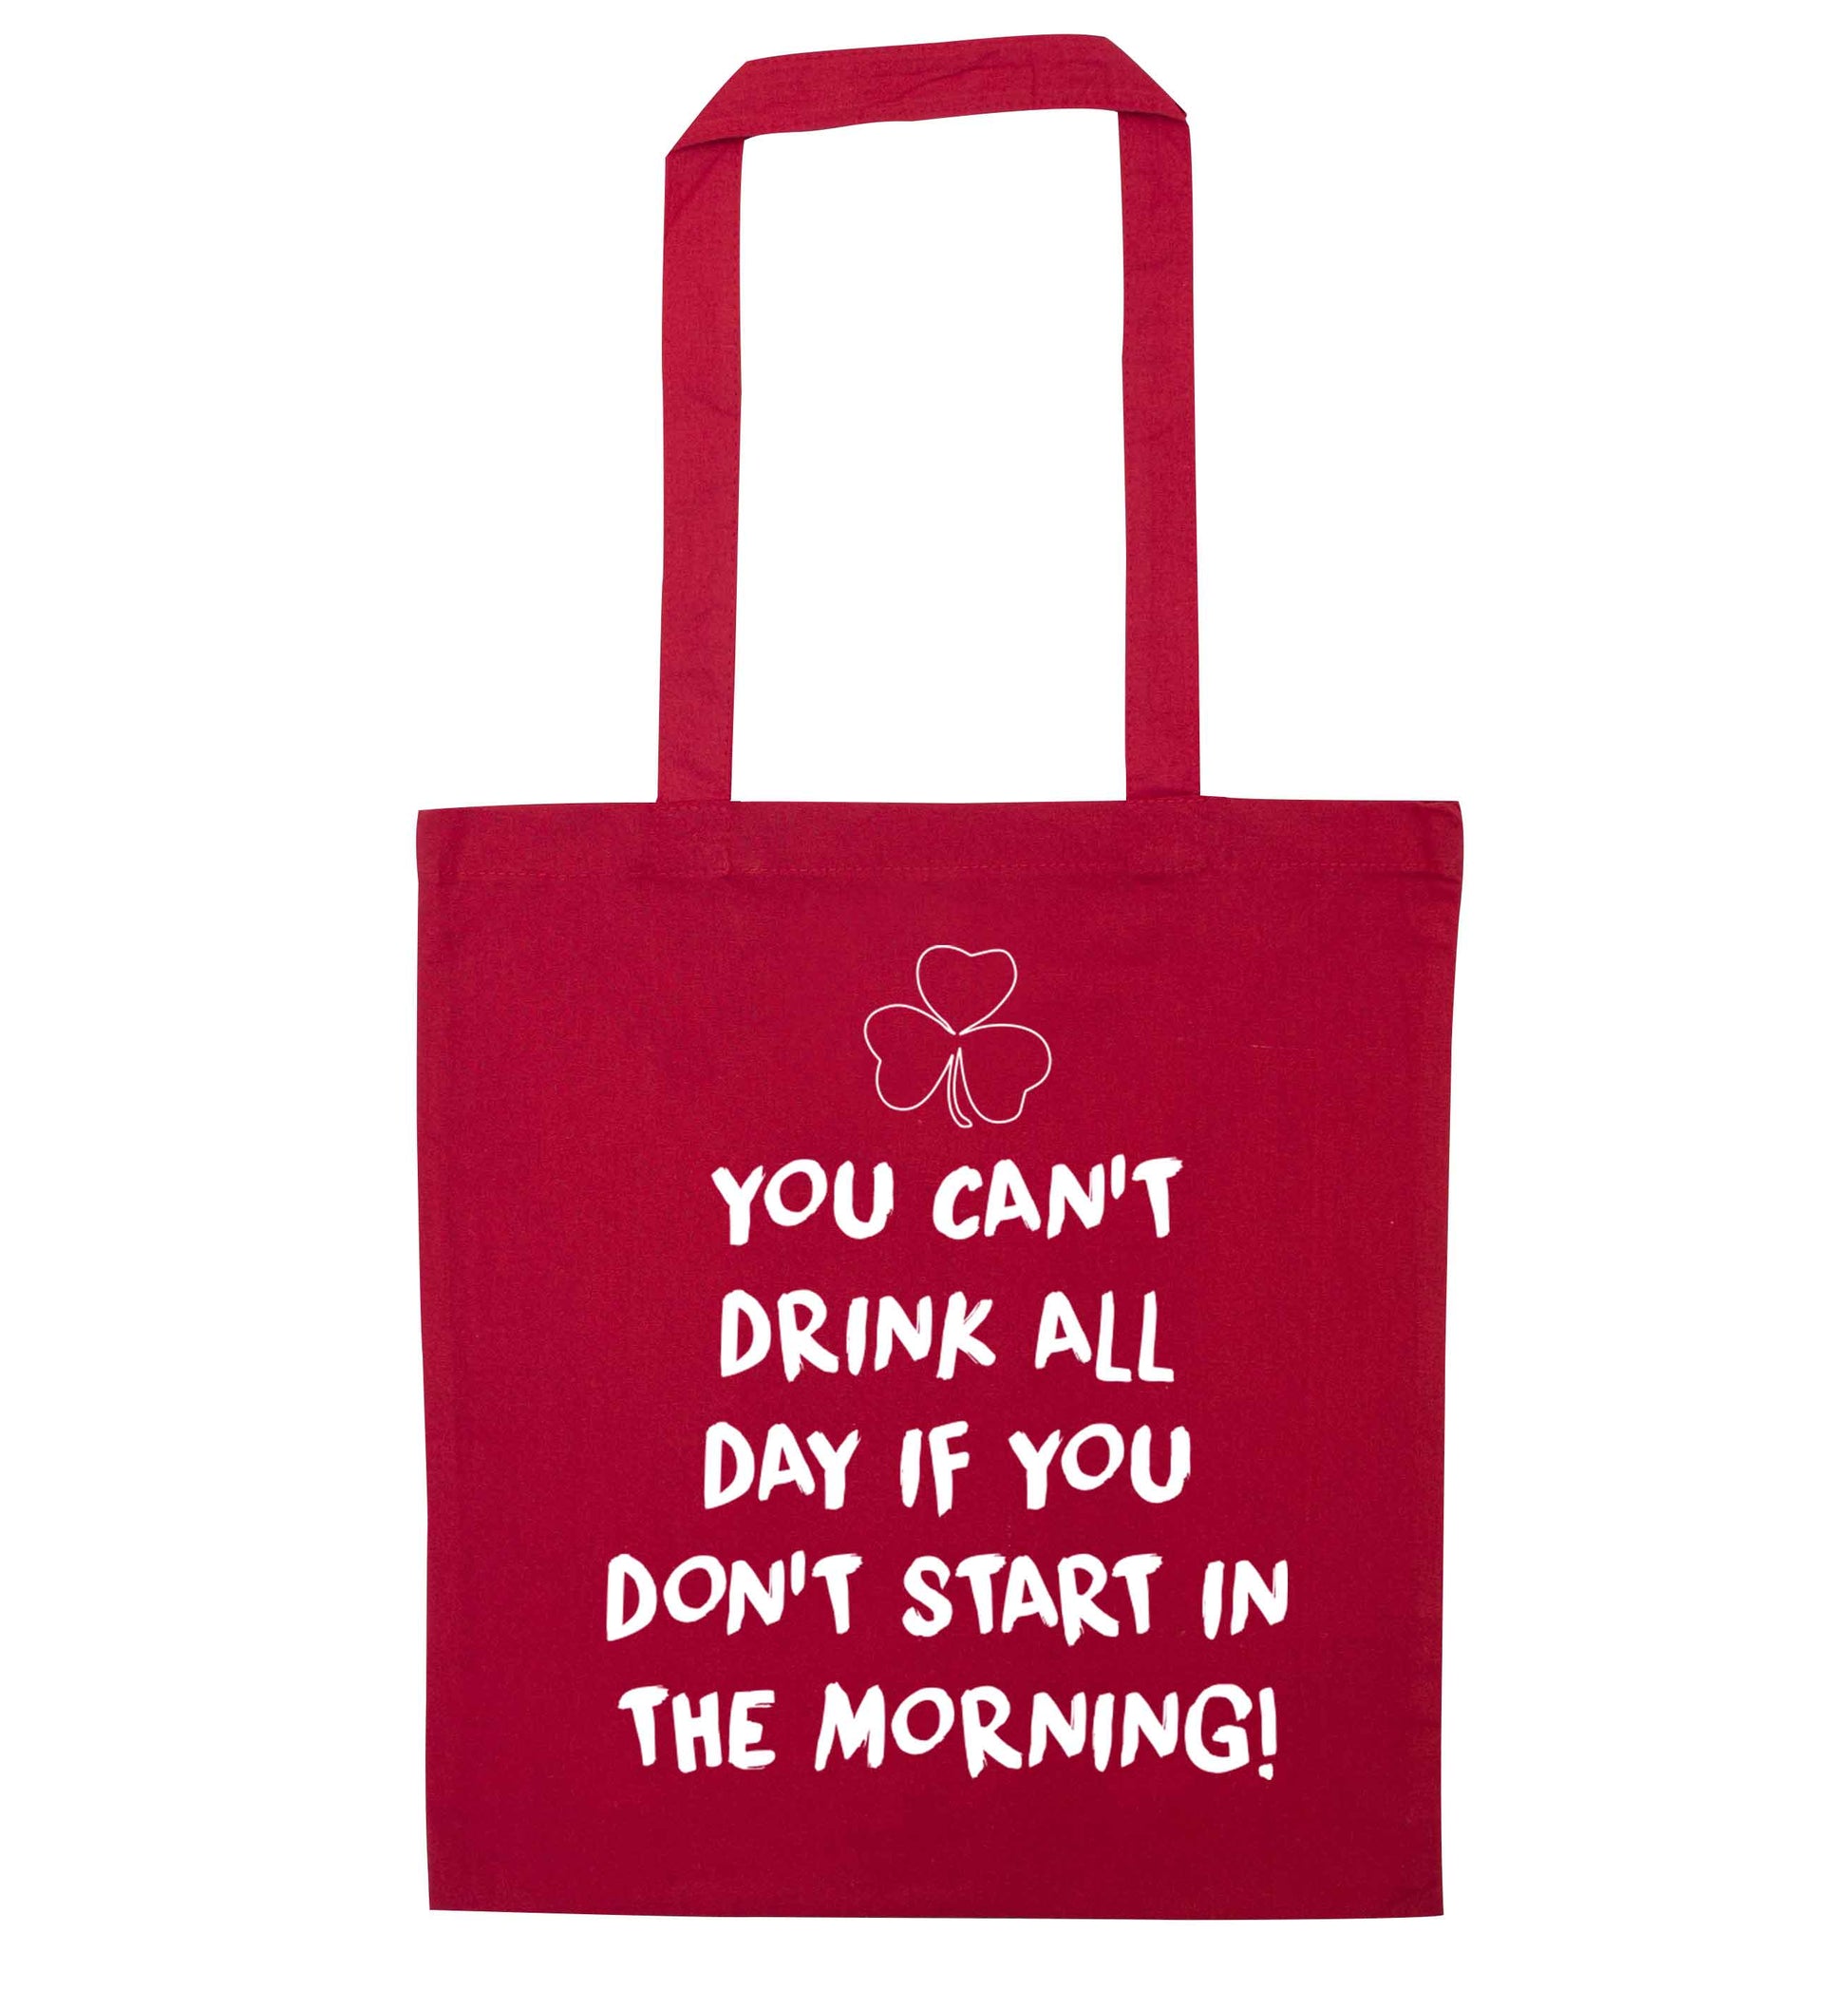 You can't drink all day if you don't start in the morning red tote bag